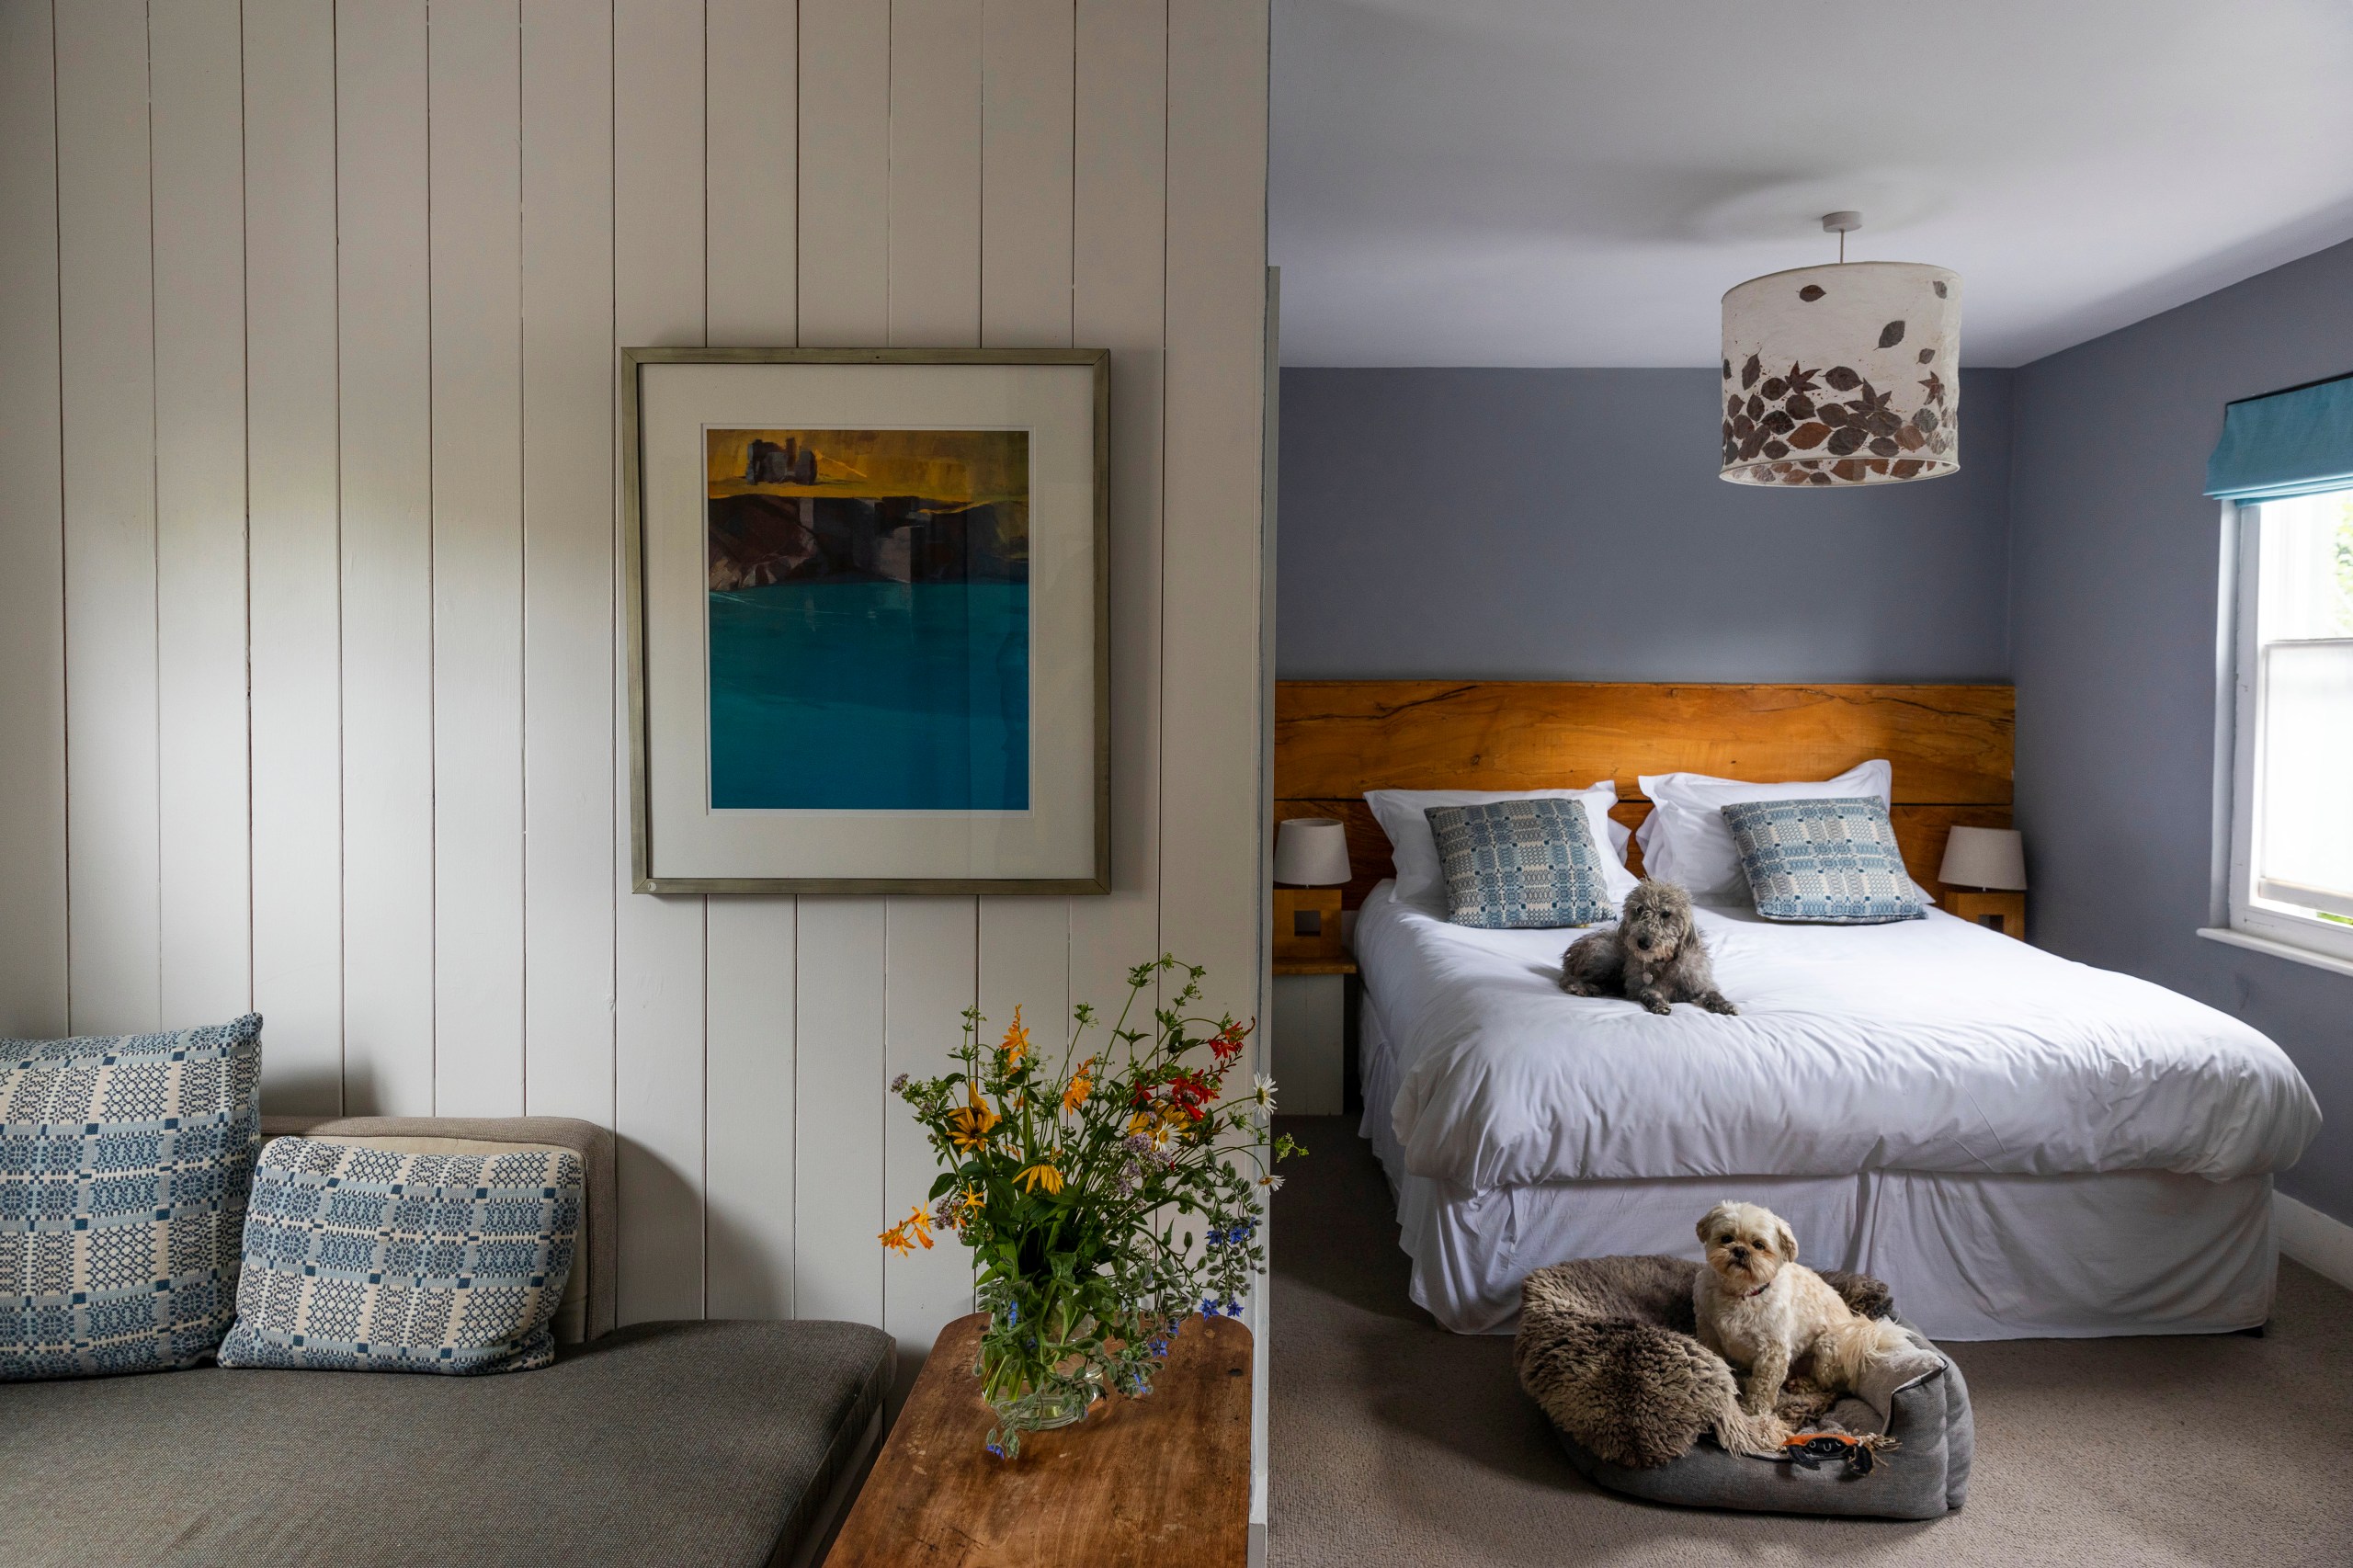 Pets are welcome in the mews rooms at Llys Meddyg